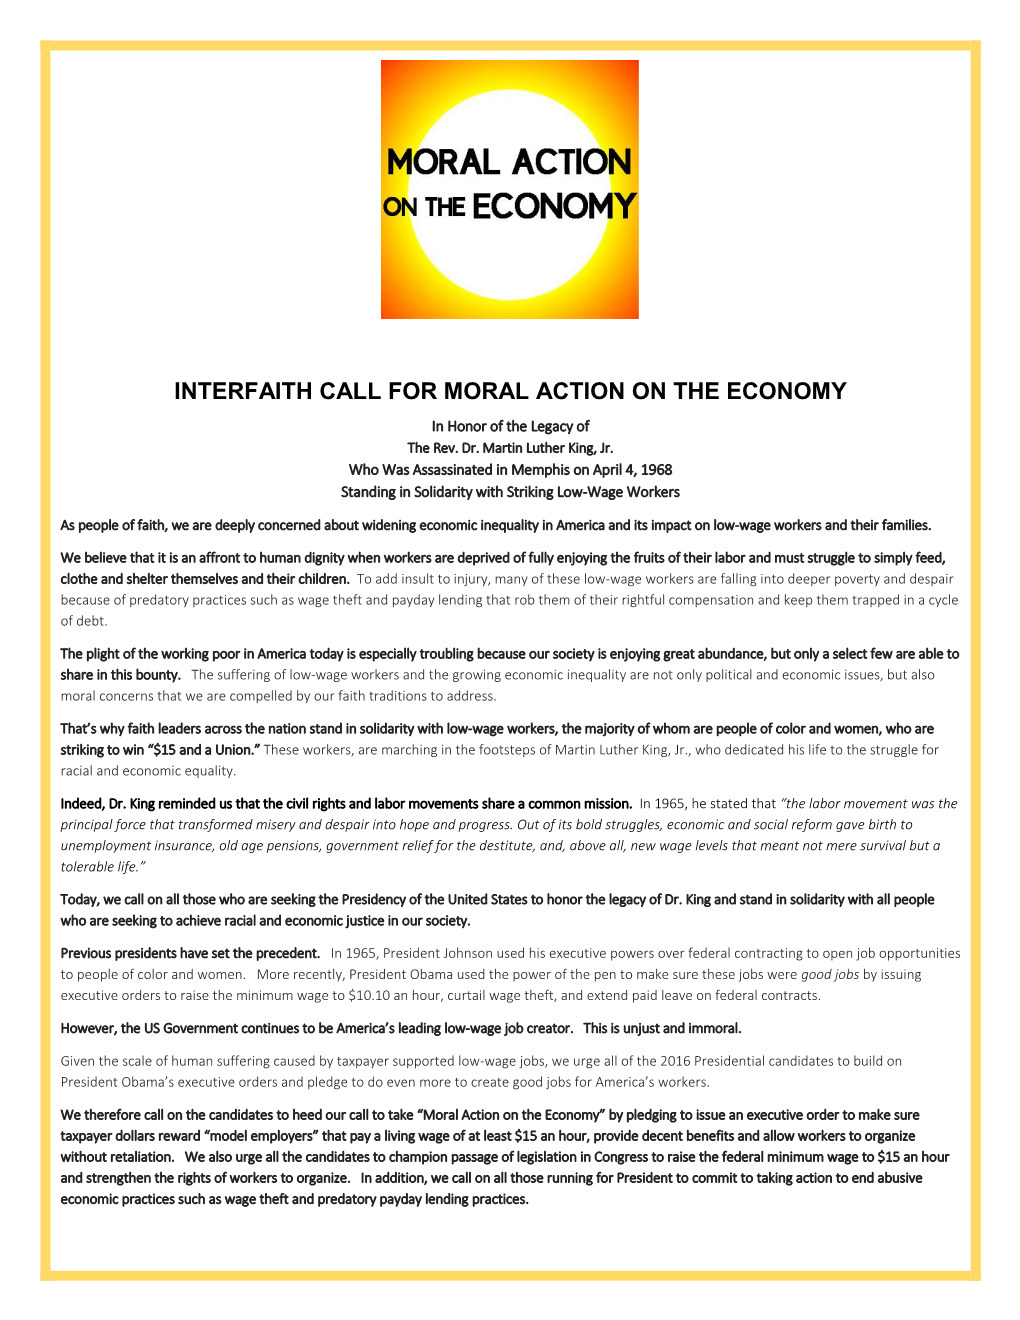 Interfaith Call for Moral Action on the Economy